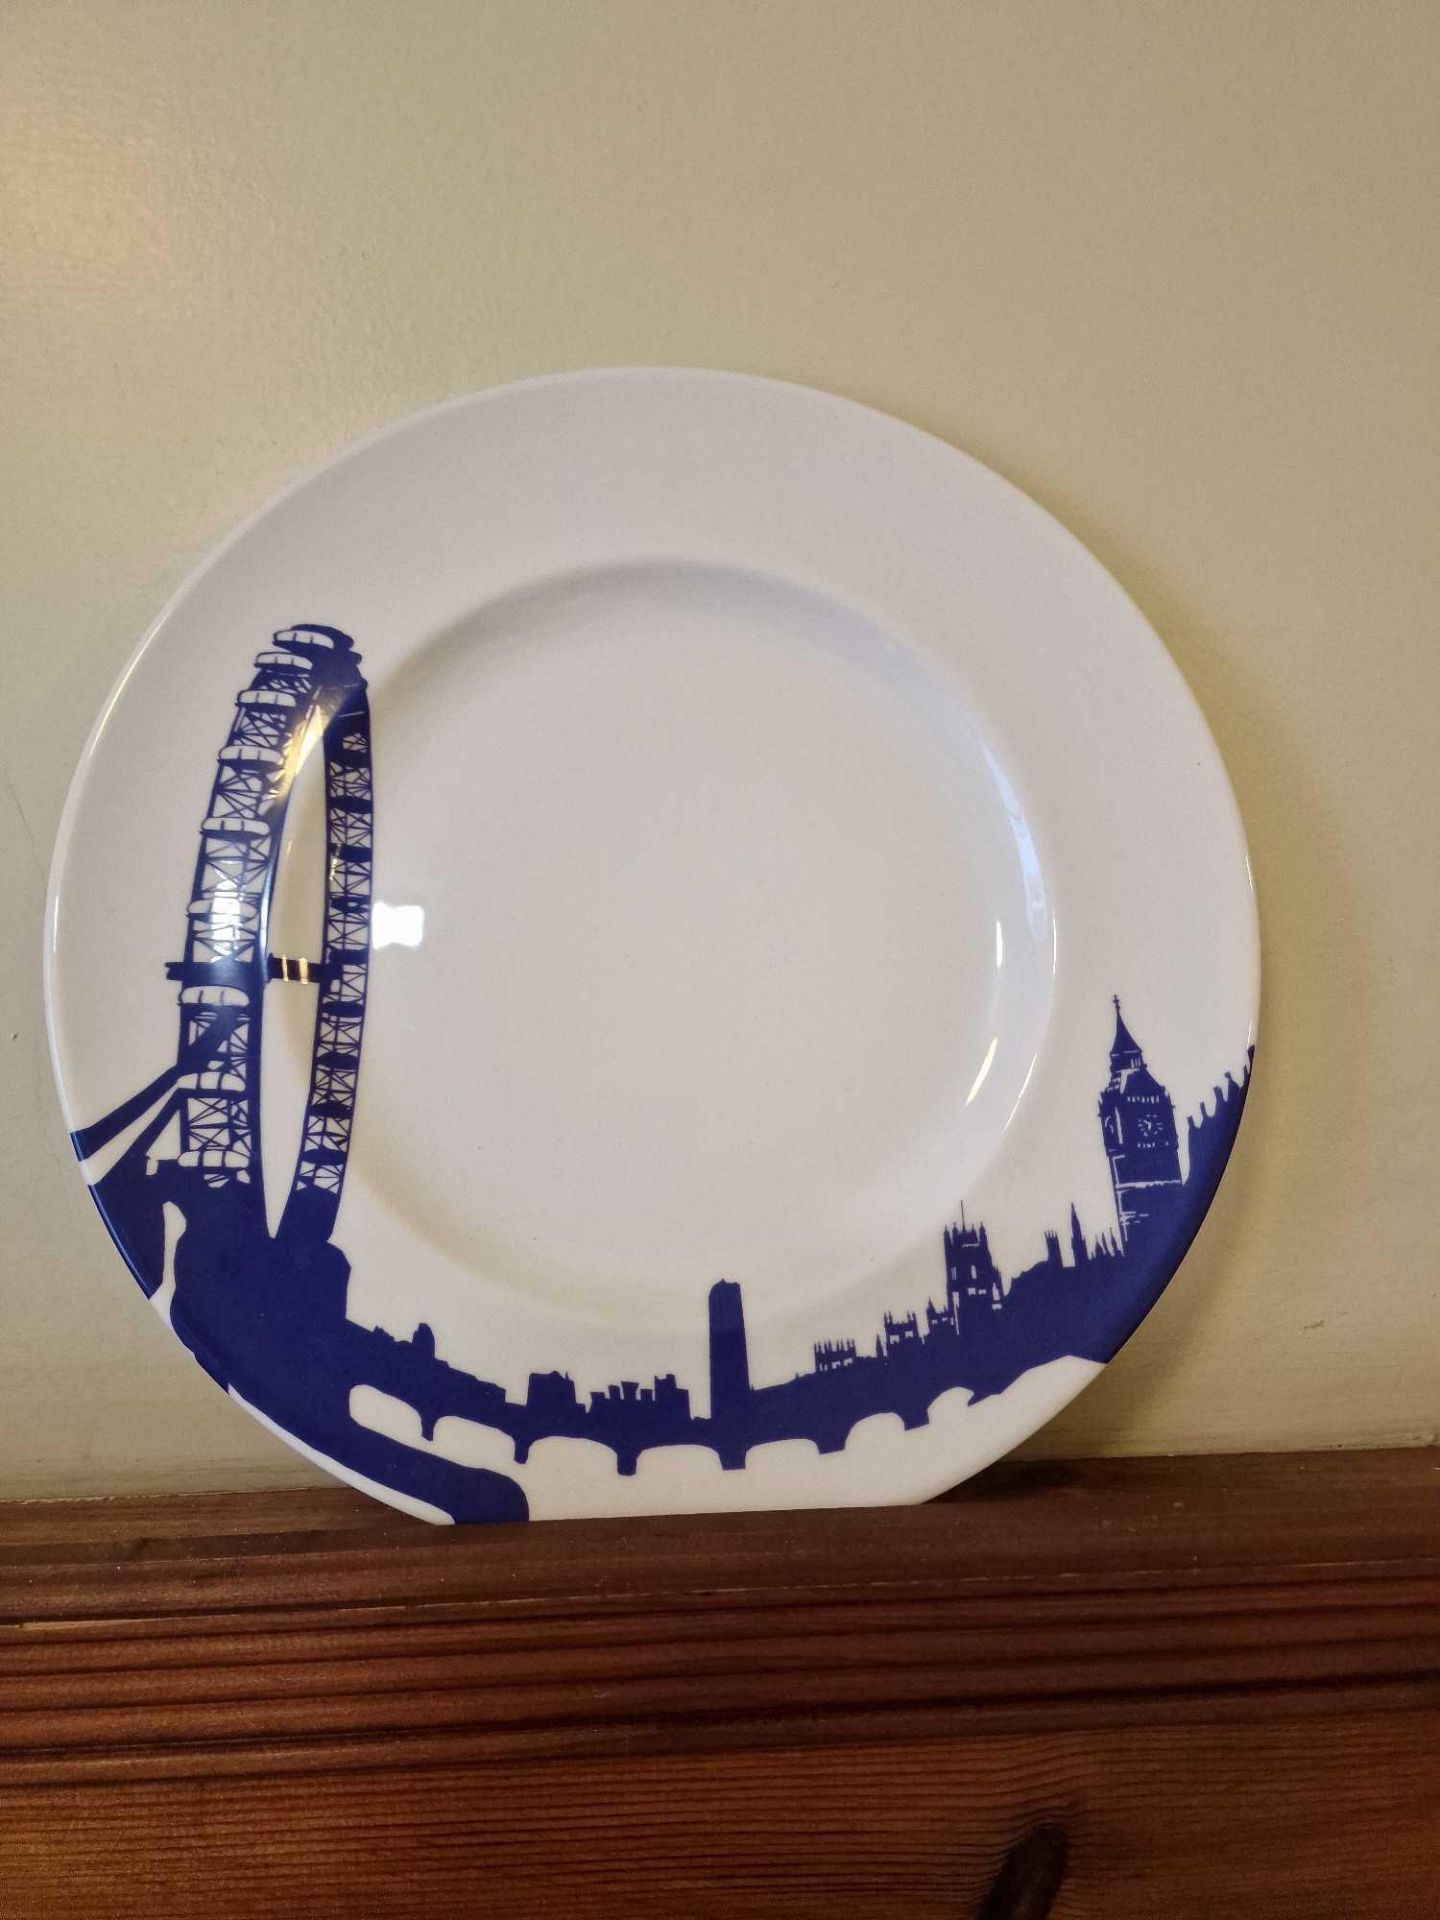 5 X Decorative Wall Plates Blue And White By Saxon And Snowdon Flood - Image 3 of 6